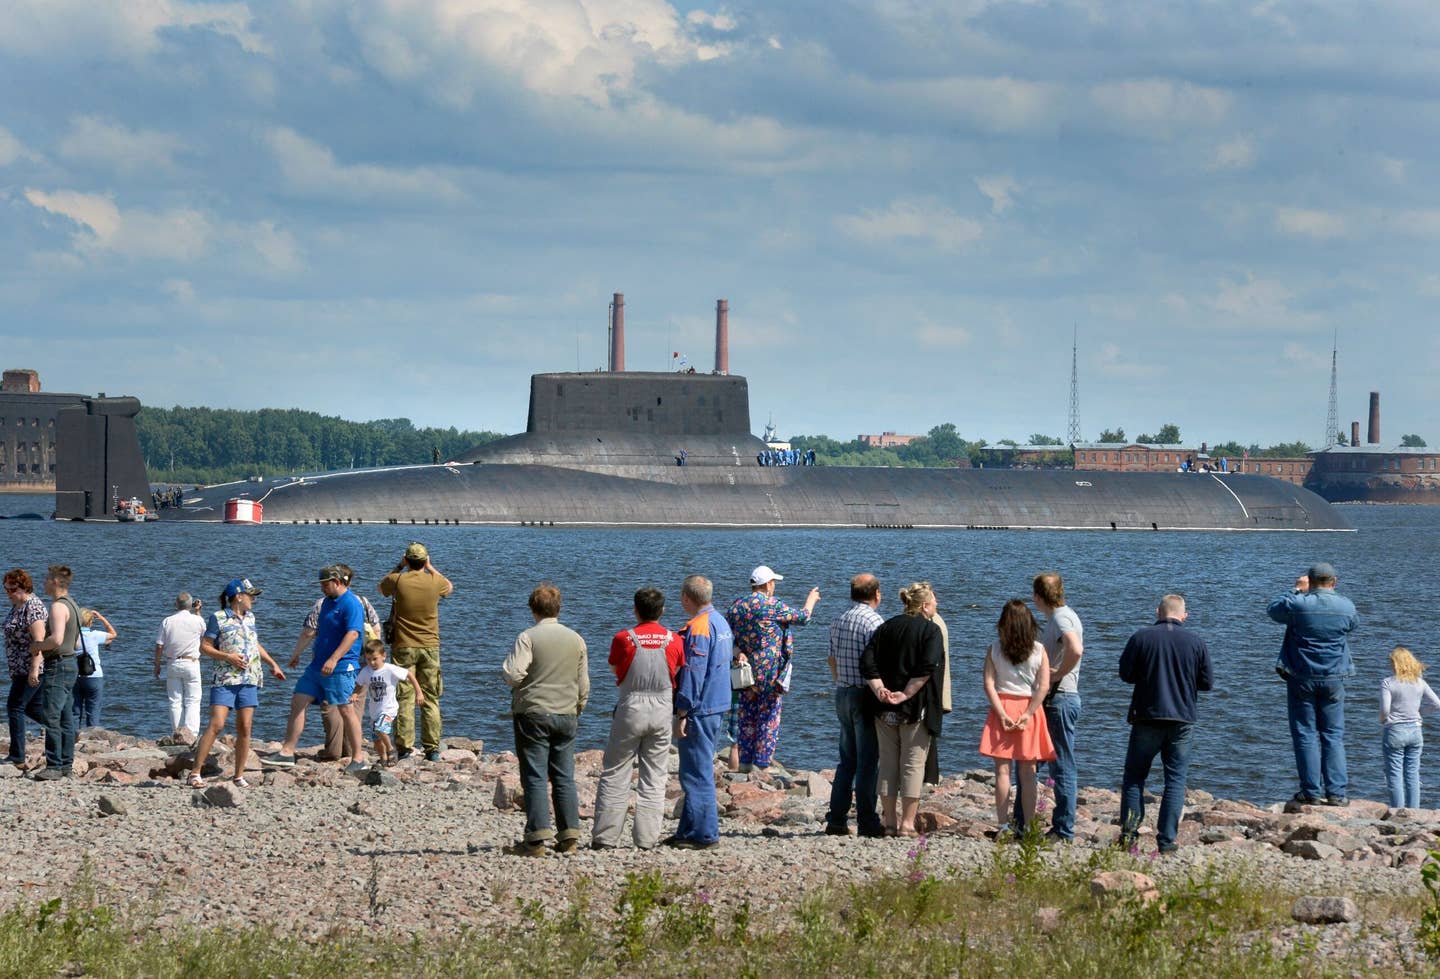 People watch as the Russian submarine Dmitry Donskoy (NATO - Typhoon class), the world's largest in active service, arrives at Kronstadt Navy base, outside Saint Petersburg, on July 26, 2017, to take part in the Naval Military Parade. <em>Photo credit should read OLGA MALTSEVA/AFP via Getty Images</em>